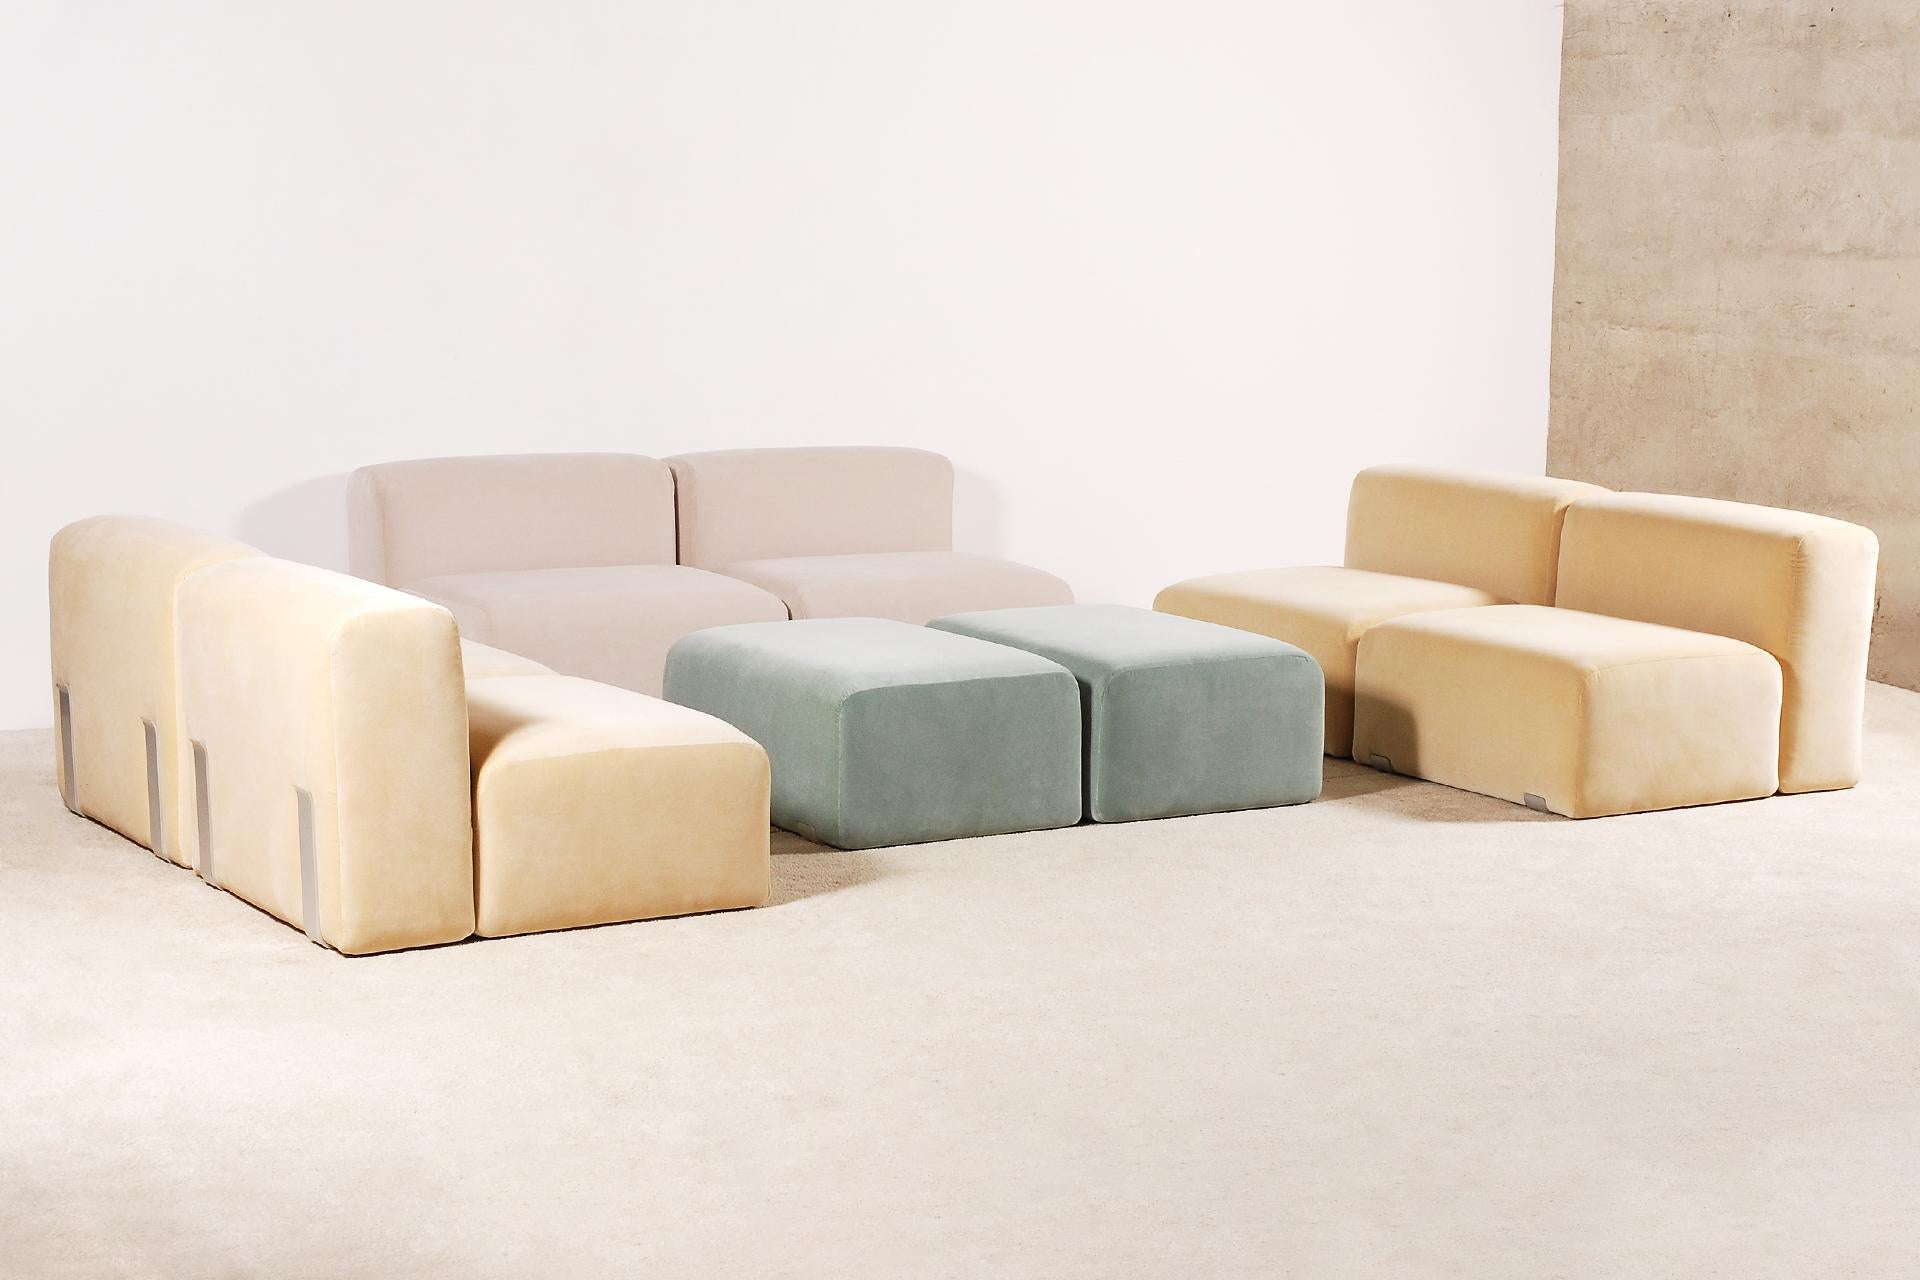 The Marcel collection, a seating modular system developed in 1965, was a tribute by Dino Gavina to Marcel Duchamp. Sofas, armchairs and pouf designed by the architect Kazuhide Takahama, are the result of an artistic collaboration with